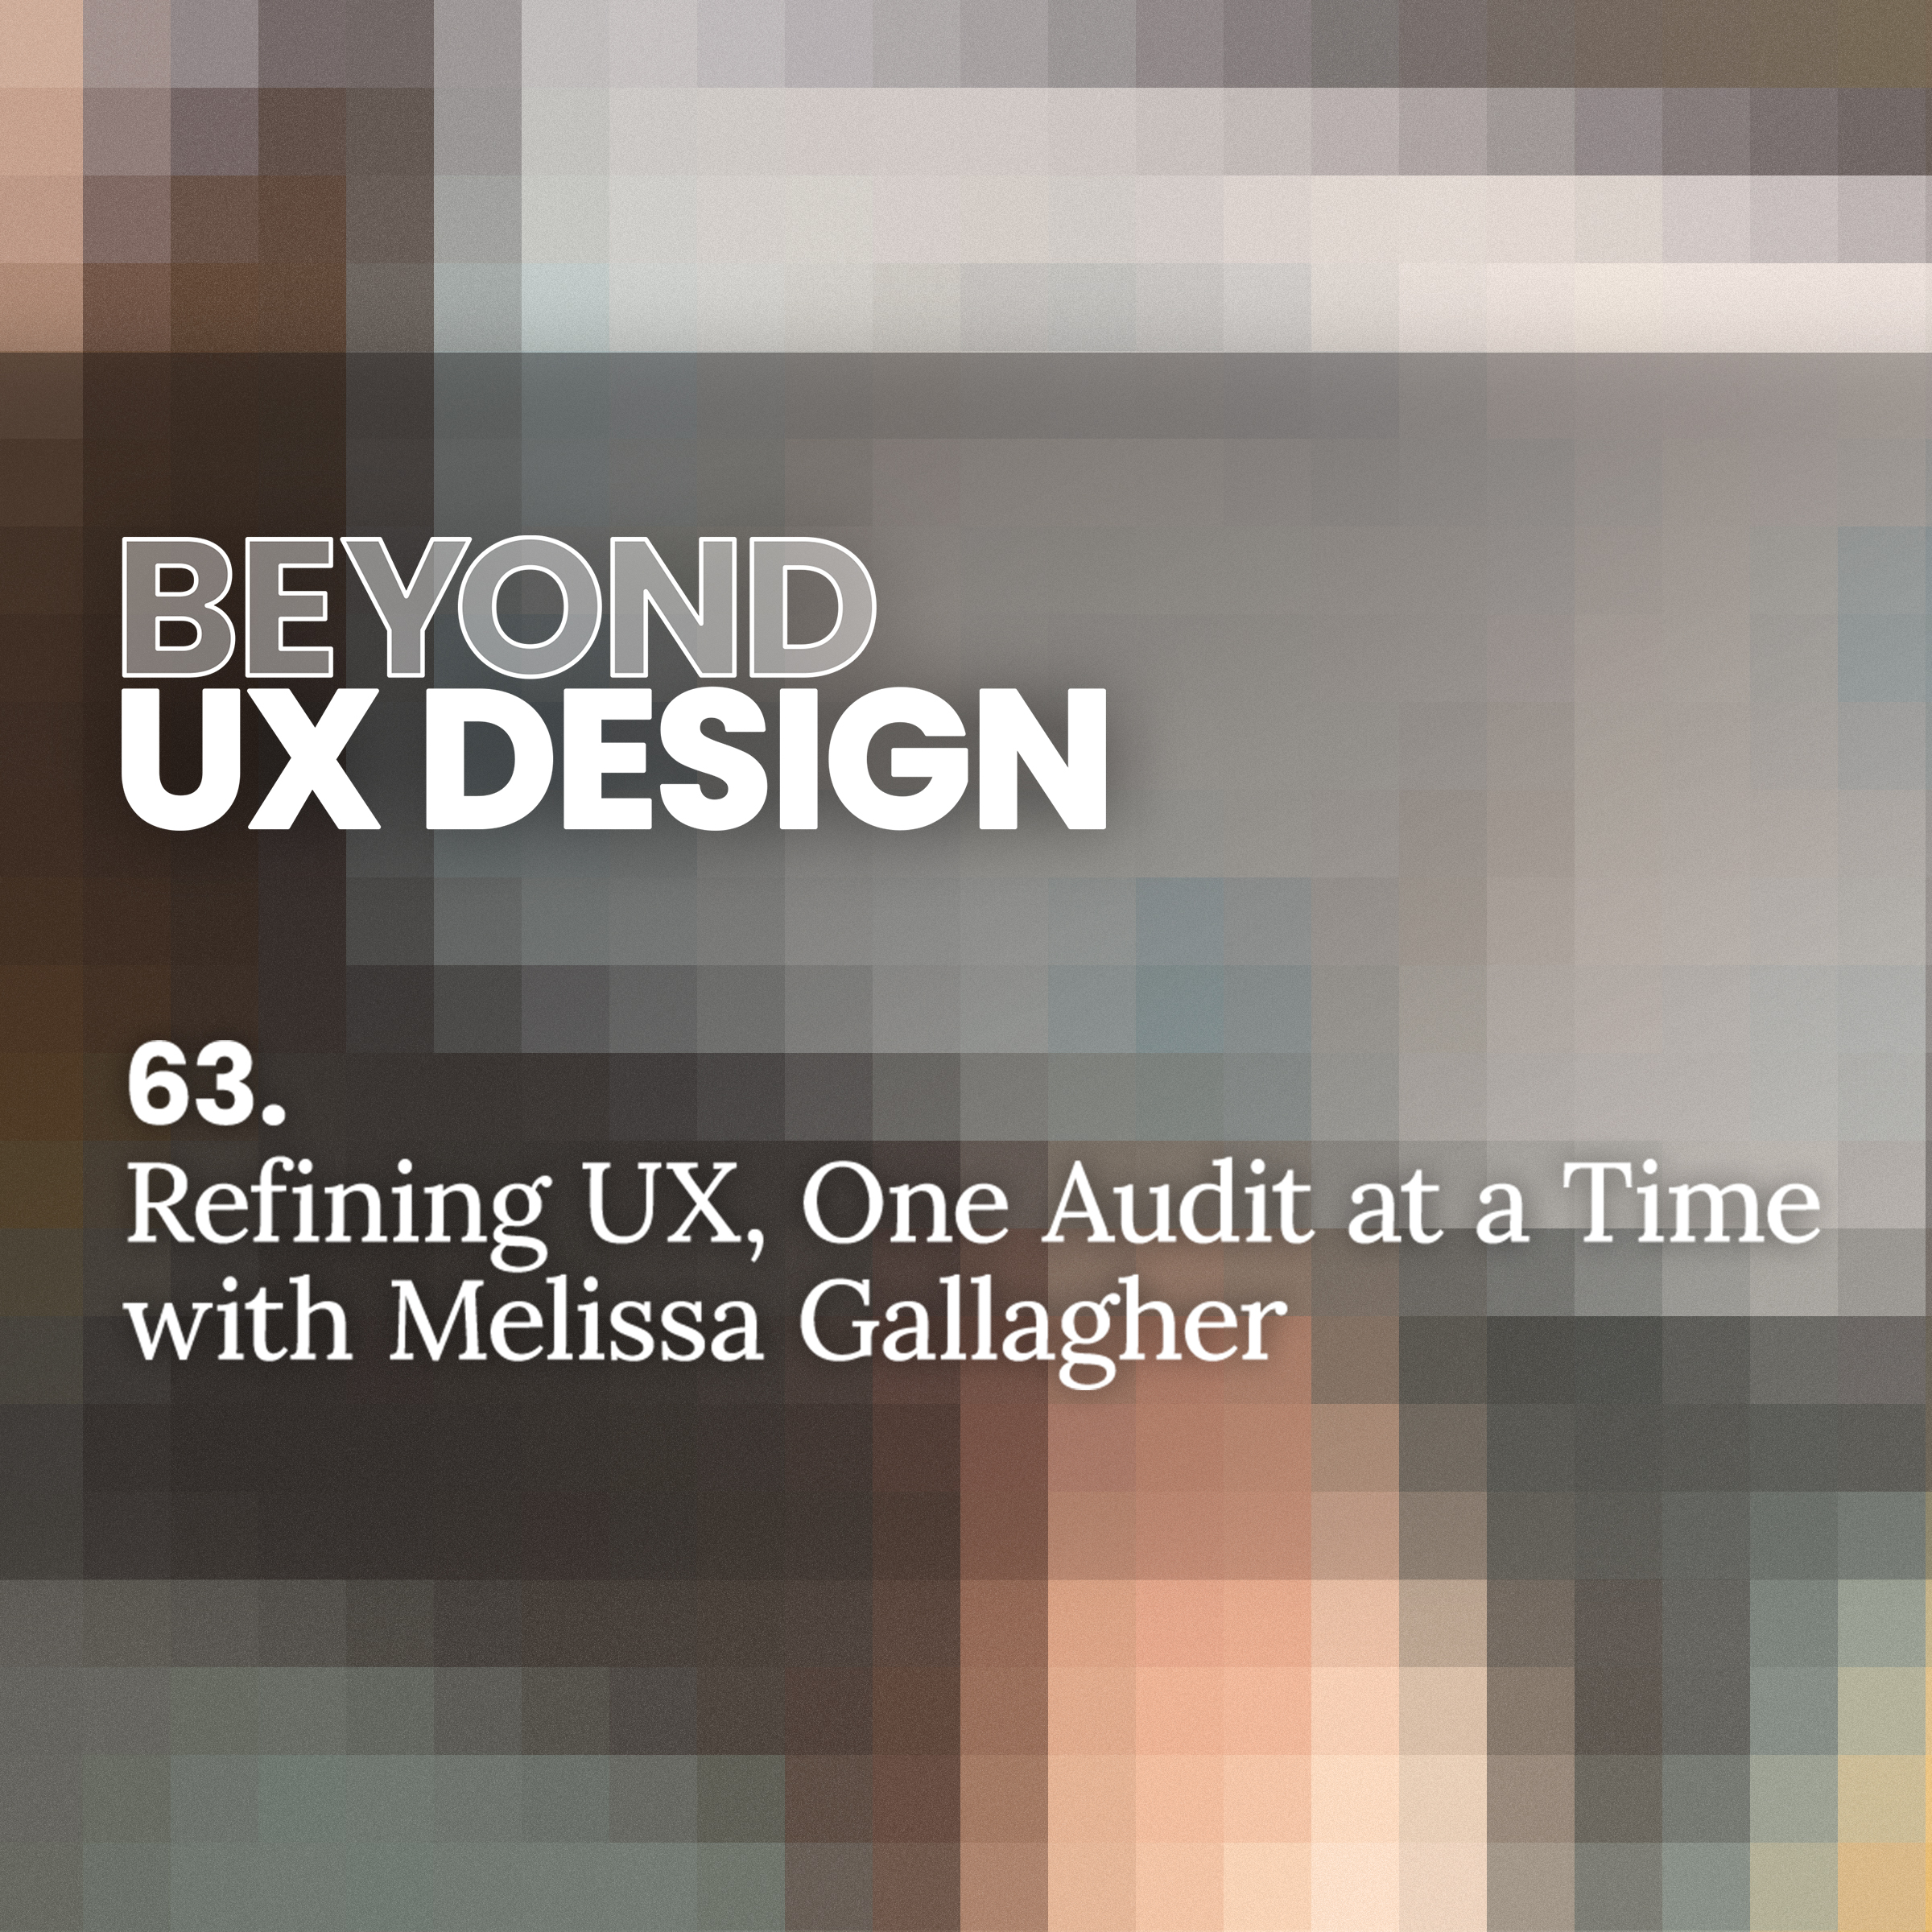 63. Auditing for Excellence: Refining UX, One Audit at a Time with Melissa Gallagher